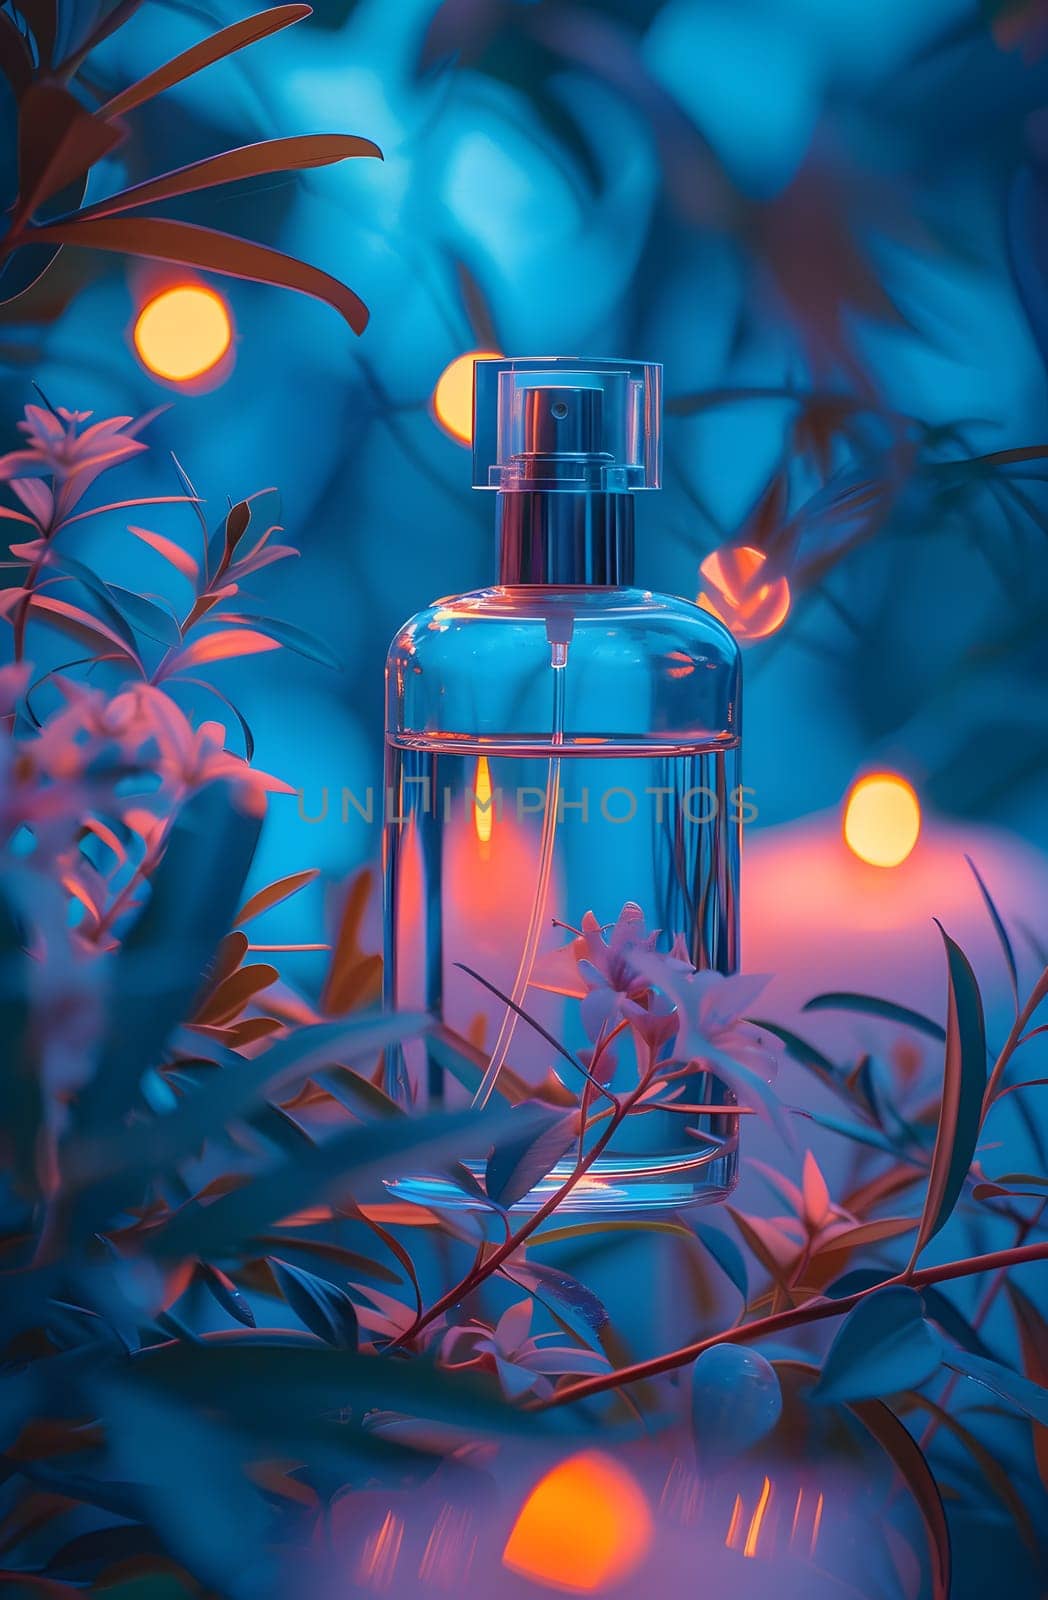 A liquid bottle of perfume sits on a windowsill surrounded by vibrant purple flowers, green leaves, and a branch. The azure water in the bottle complements the natural beauty of the organism